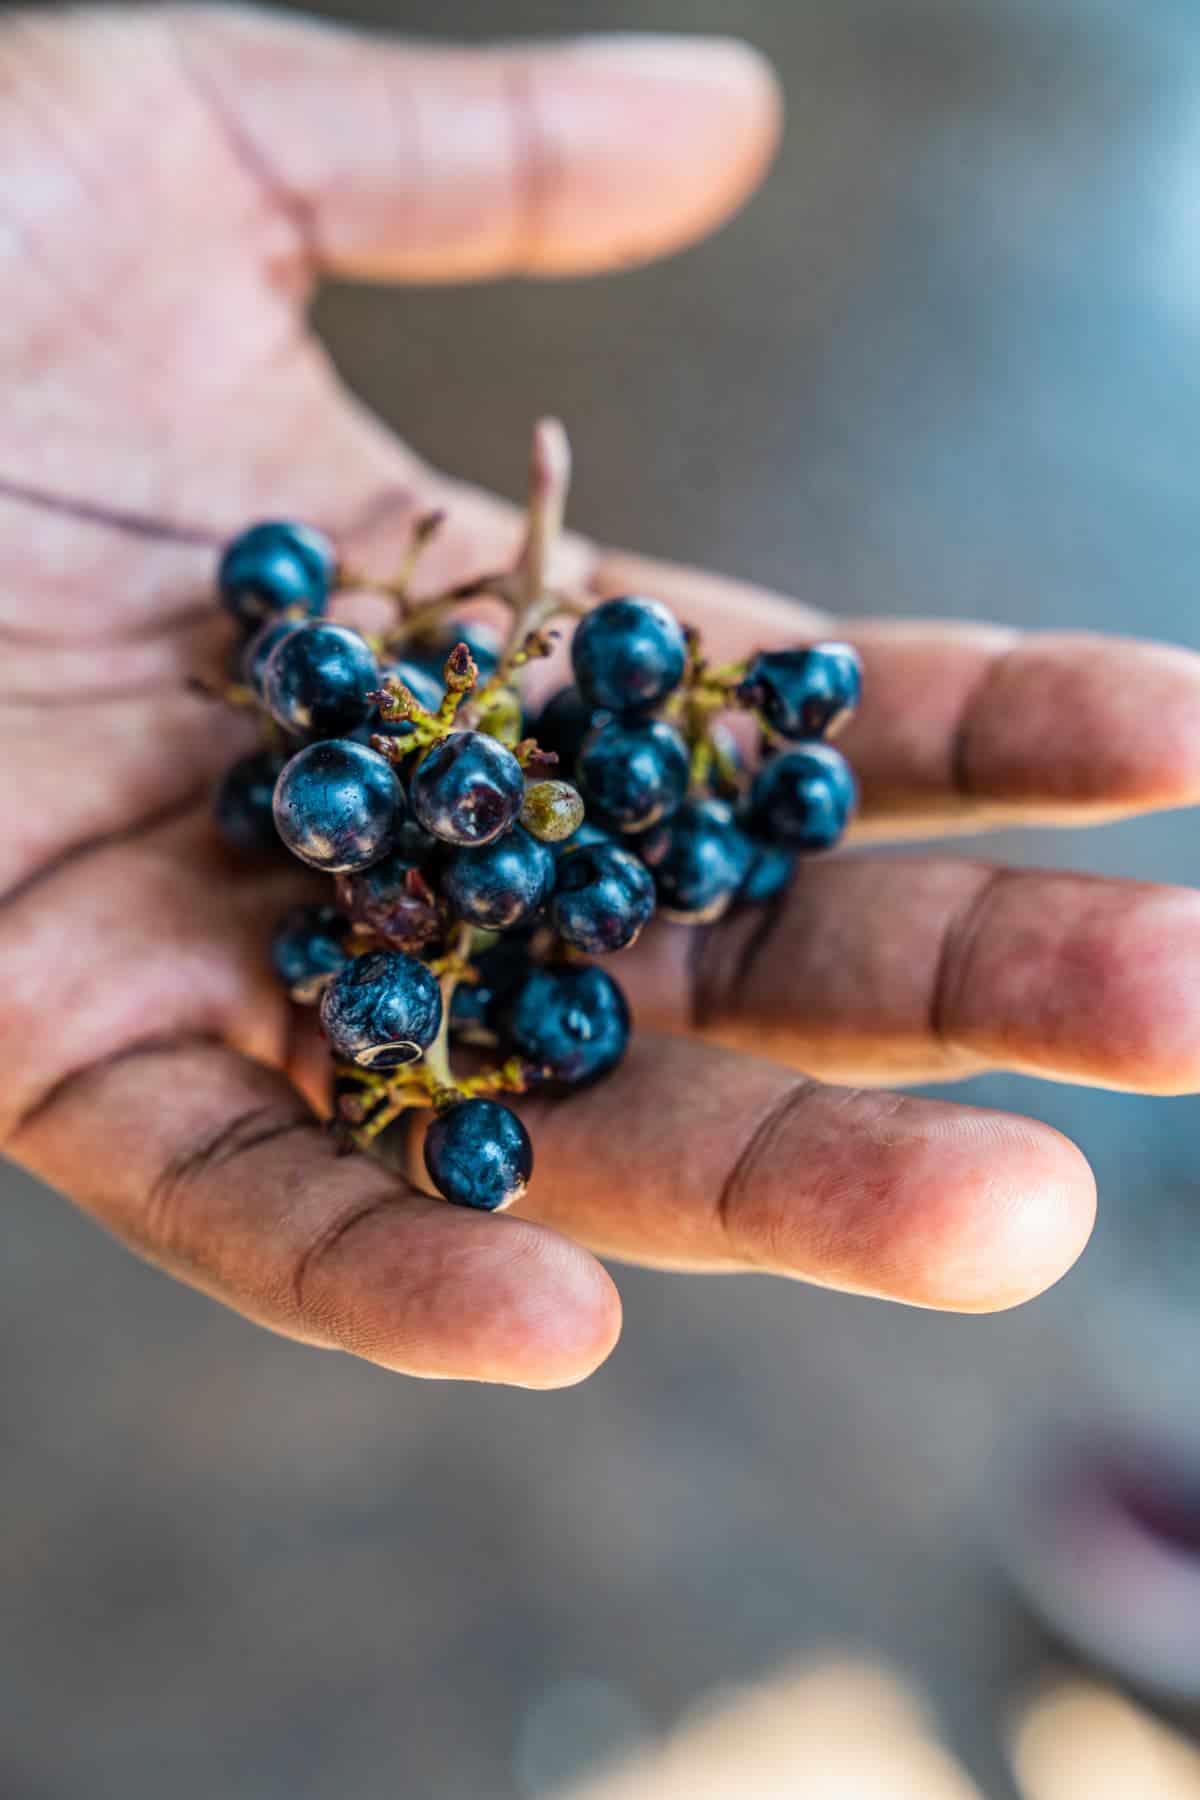 Bushel of Cabernet grapes in the palm of a hand